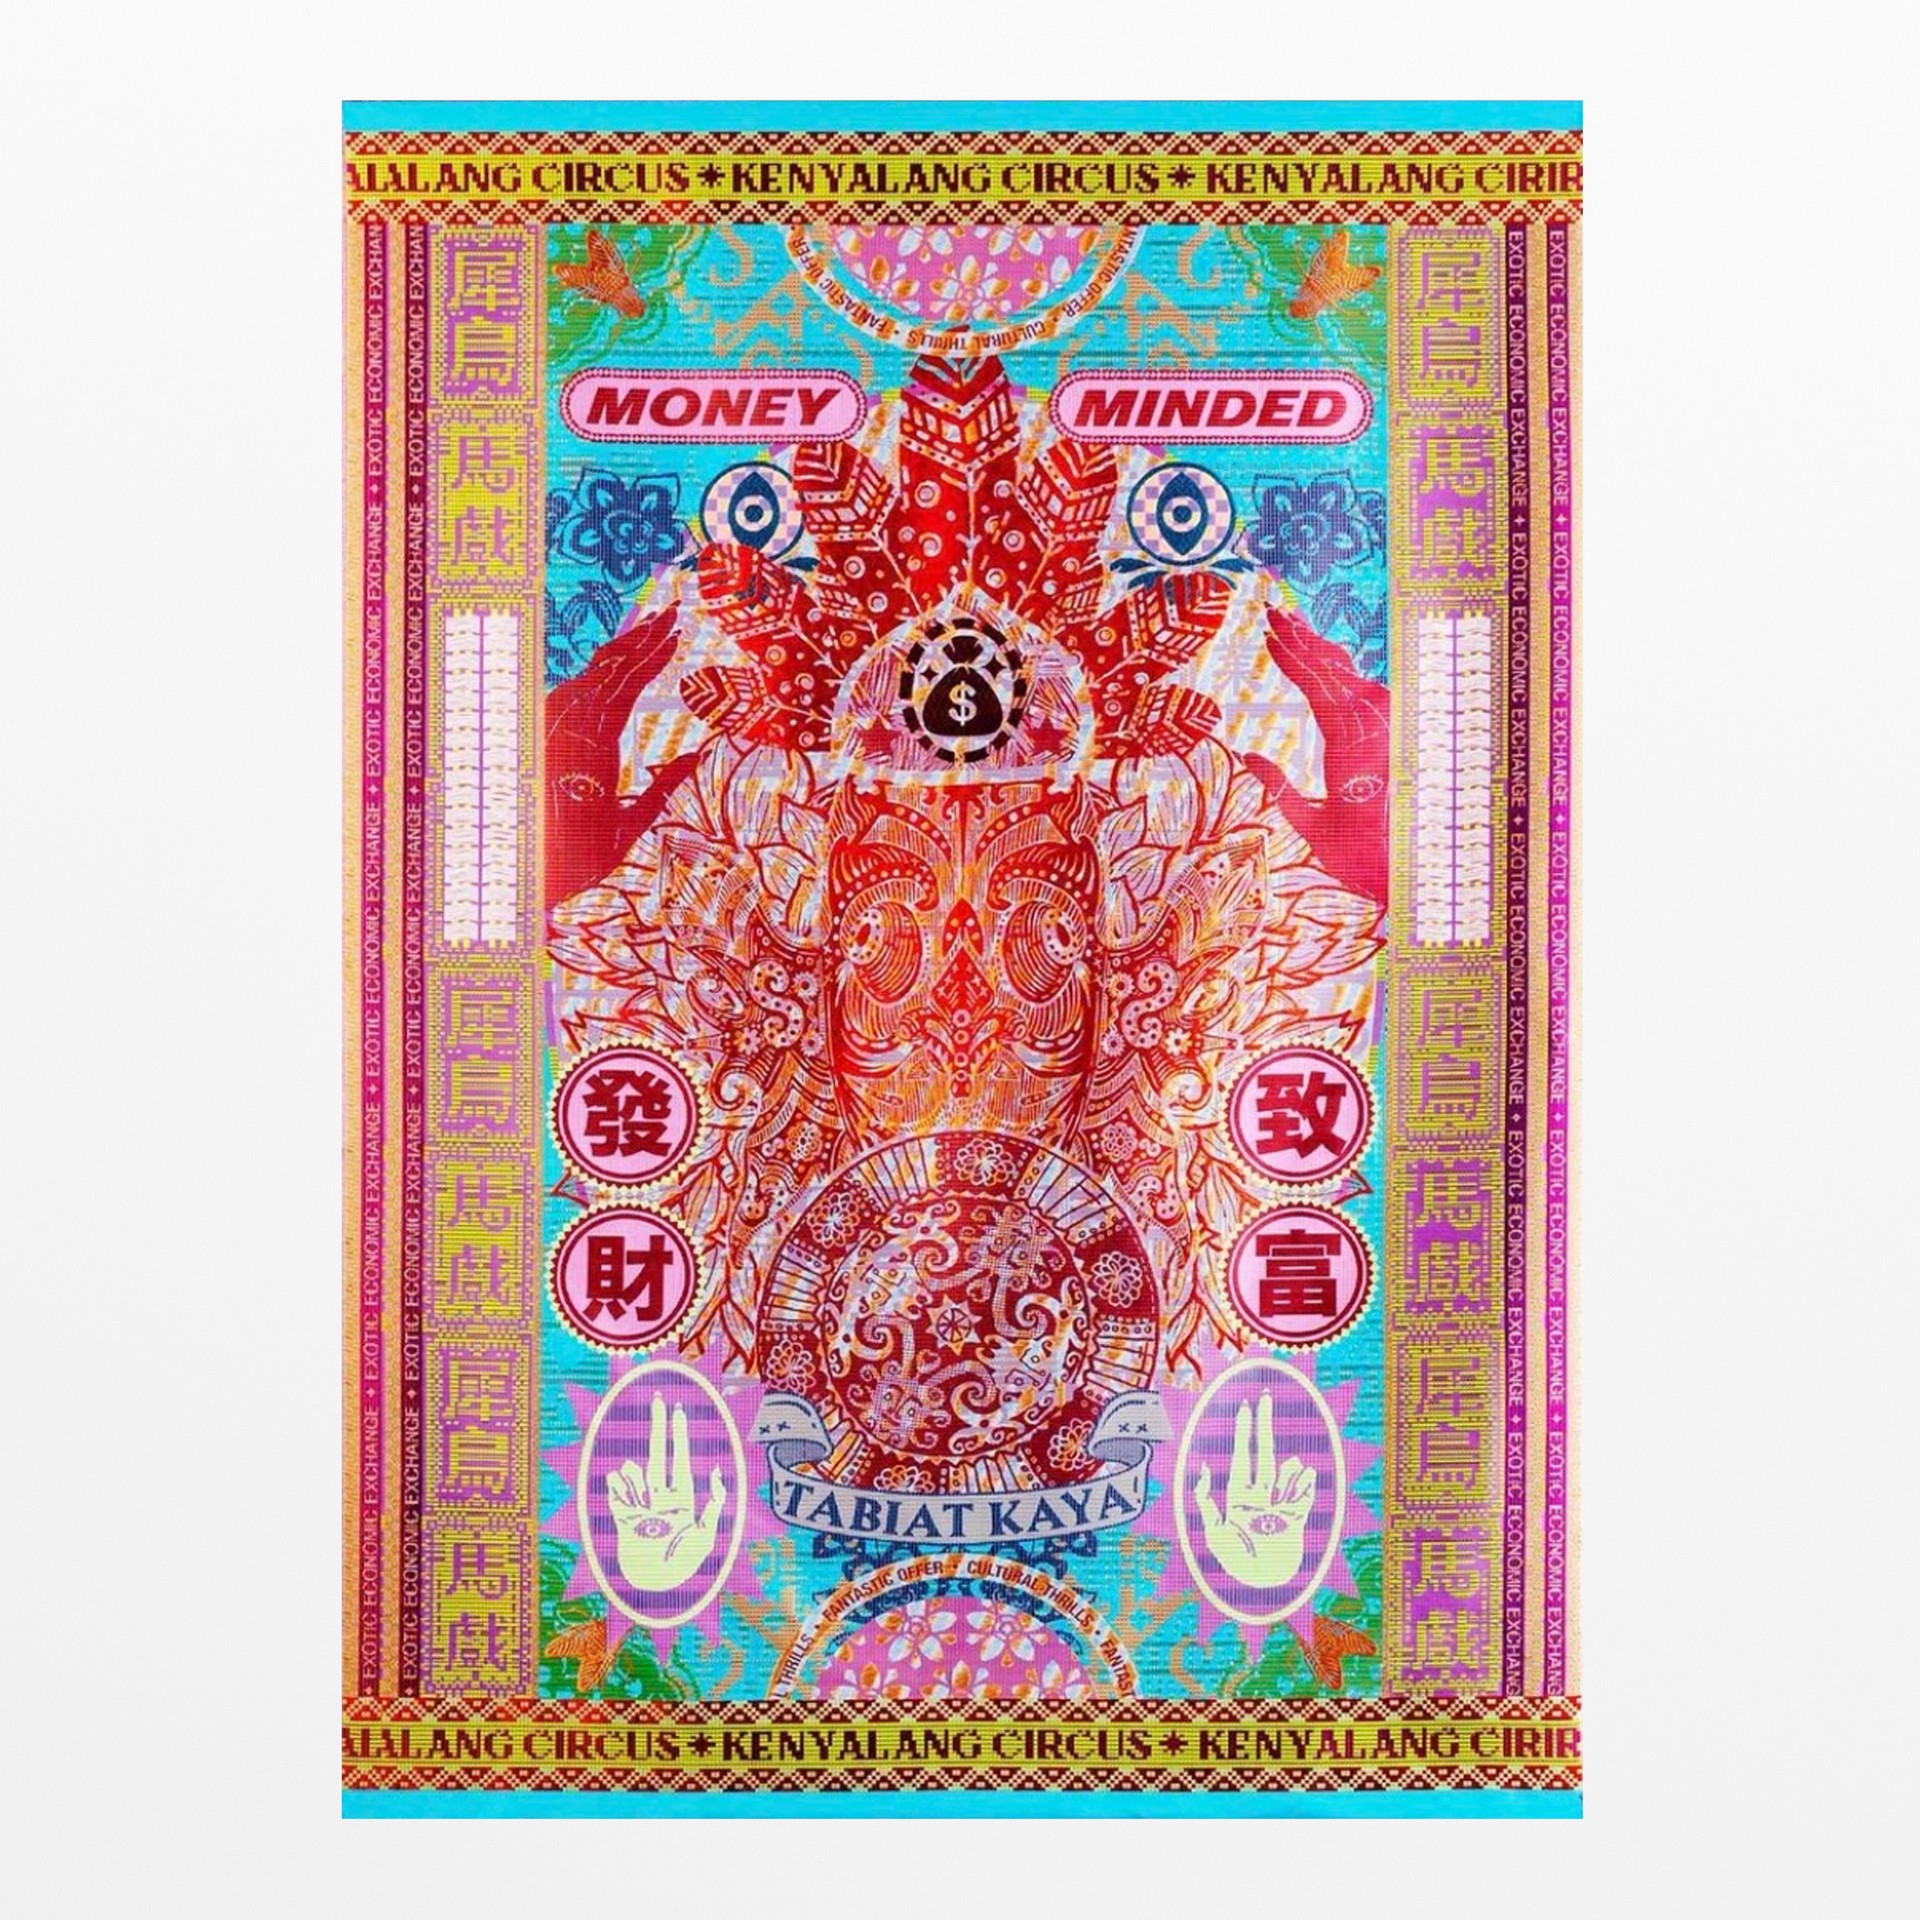 Money Minded (Woven Poster #07) by Marcos Kueh